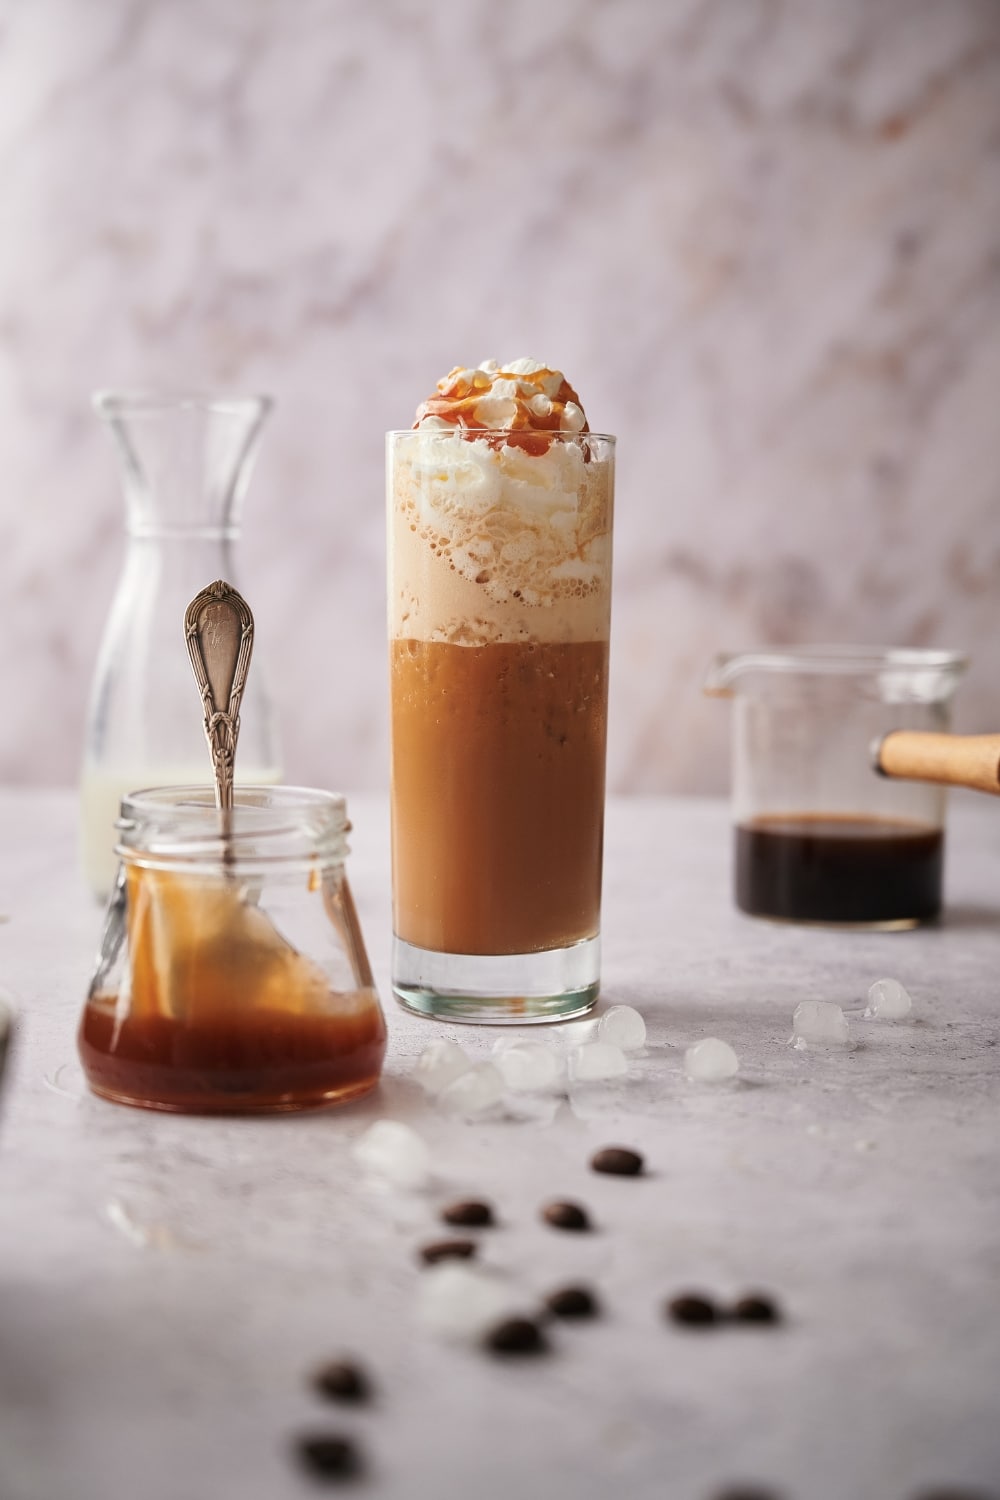 Keto frappuccino in a tall skinny glass topped with whipped cream and caramel sauce. Surrounding it is a jar of caramel sauce with a spoon, a half filled carafe of almond milk, and a glass coffee pitcher half filled with coffee.